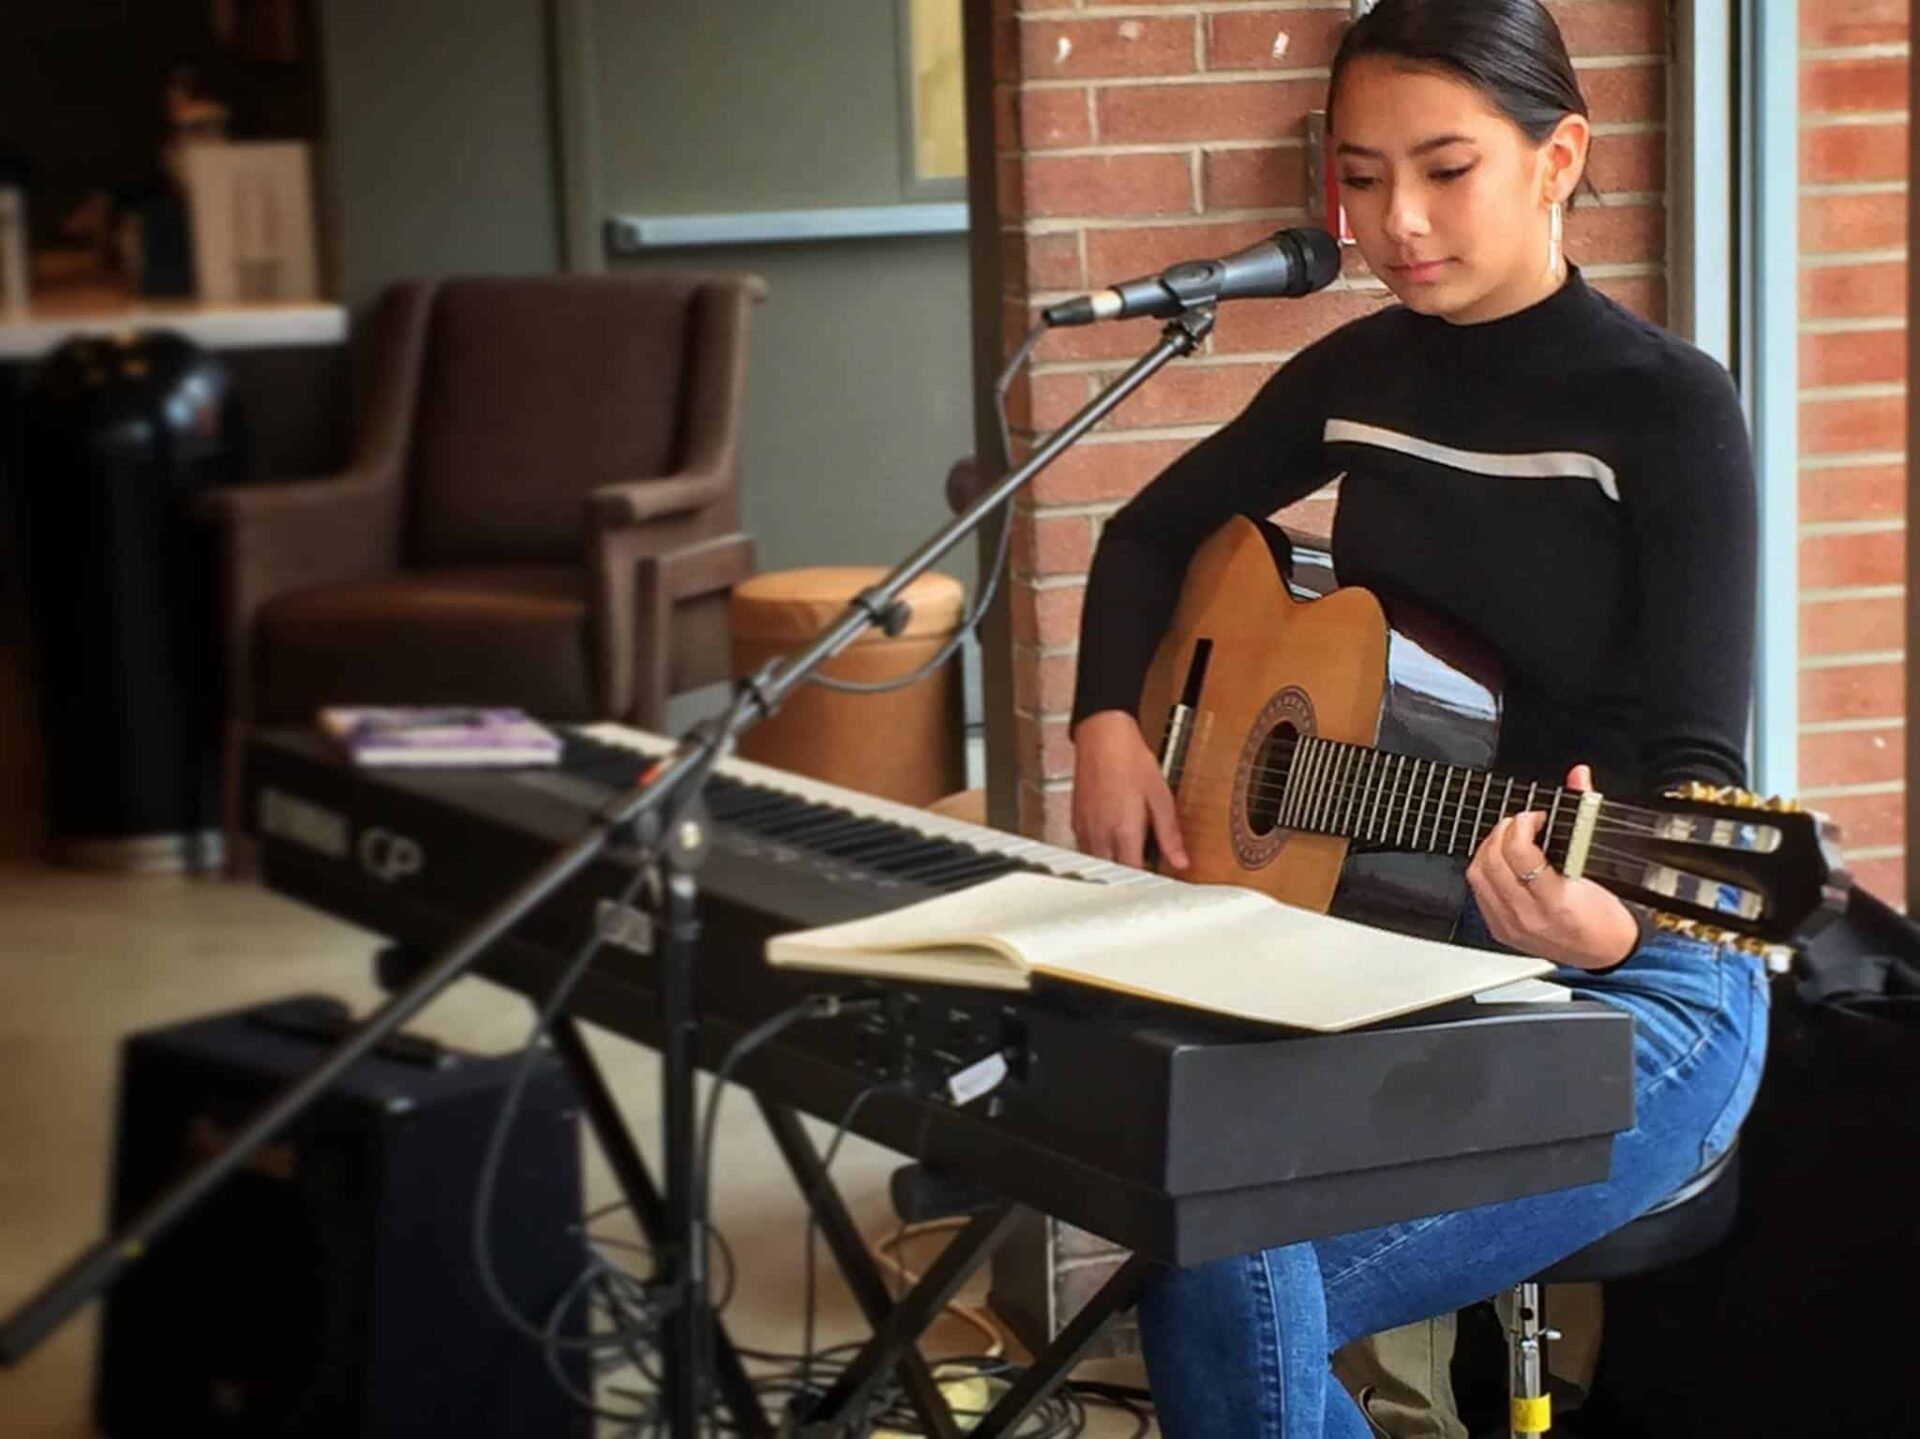 Listen to Live Music at the Starbucks on Market Street Every Weekend